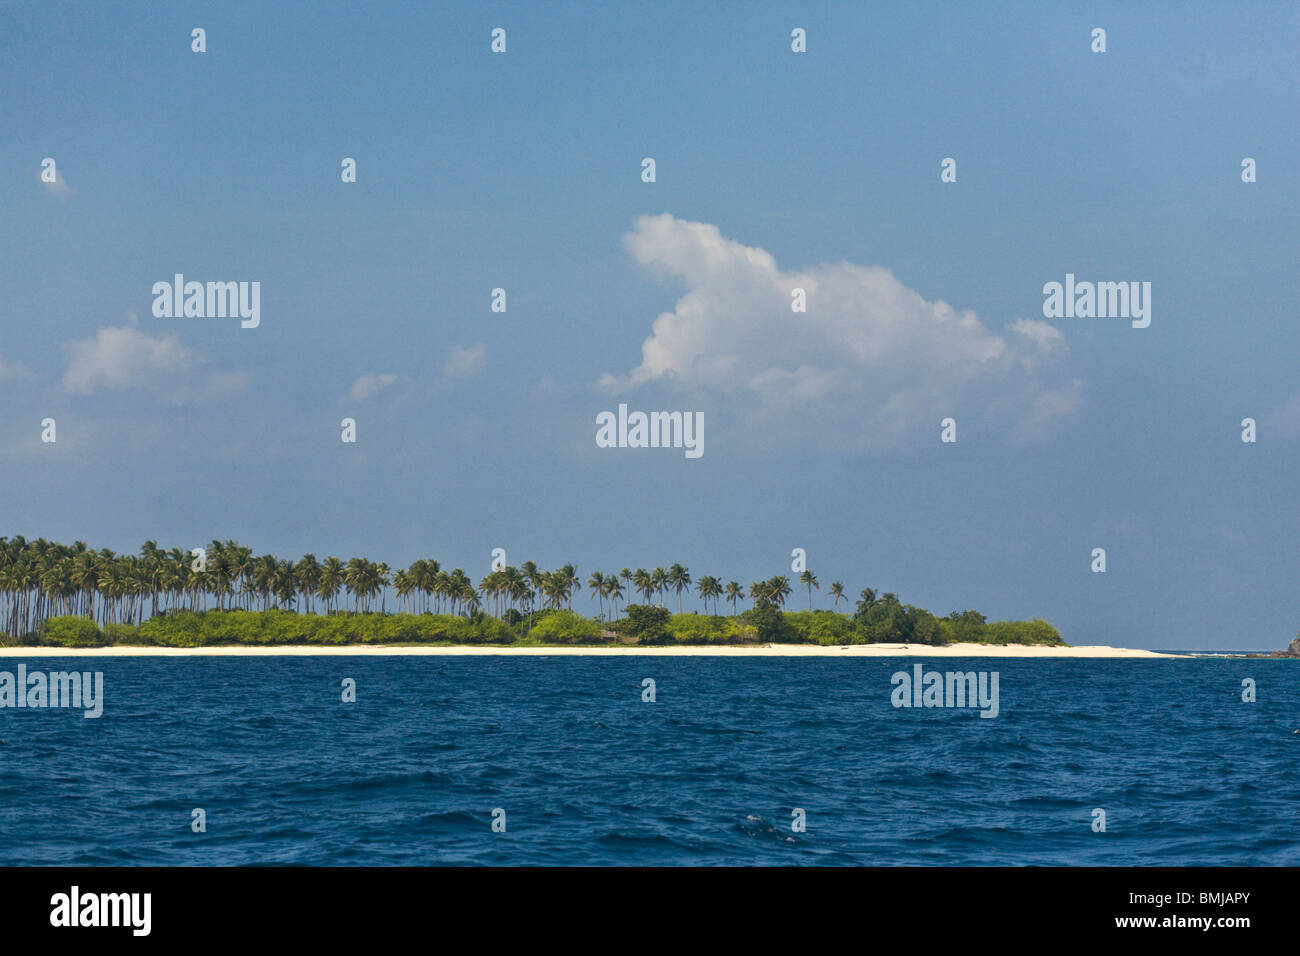 PALM TREES on a remote island in the CALAMIAN GROUP - PHILIPPINES Stock Photo